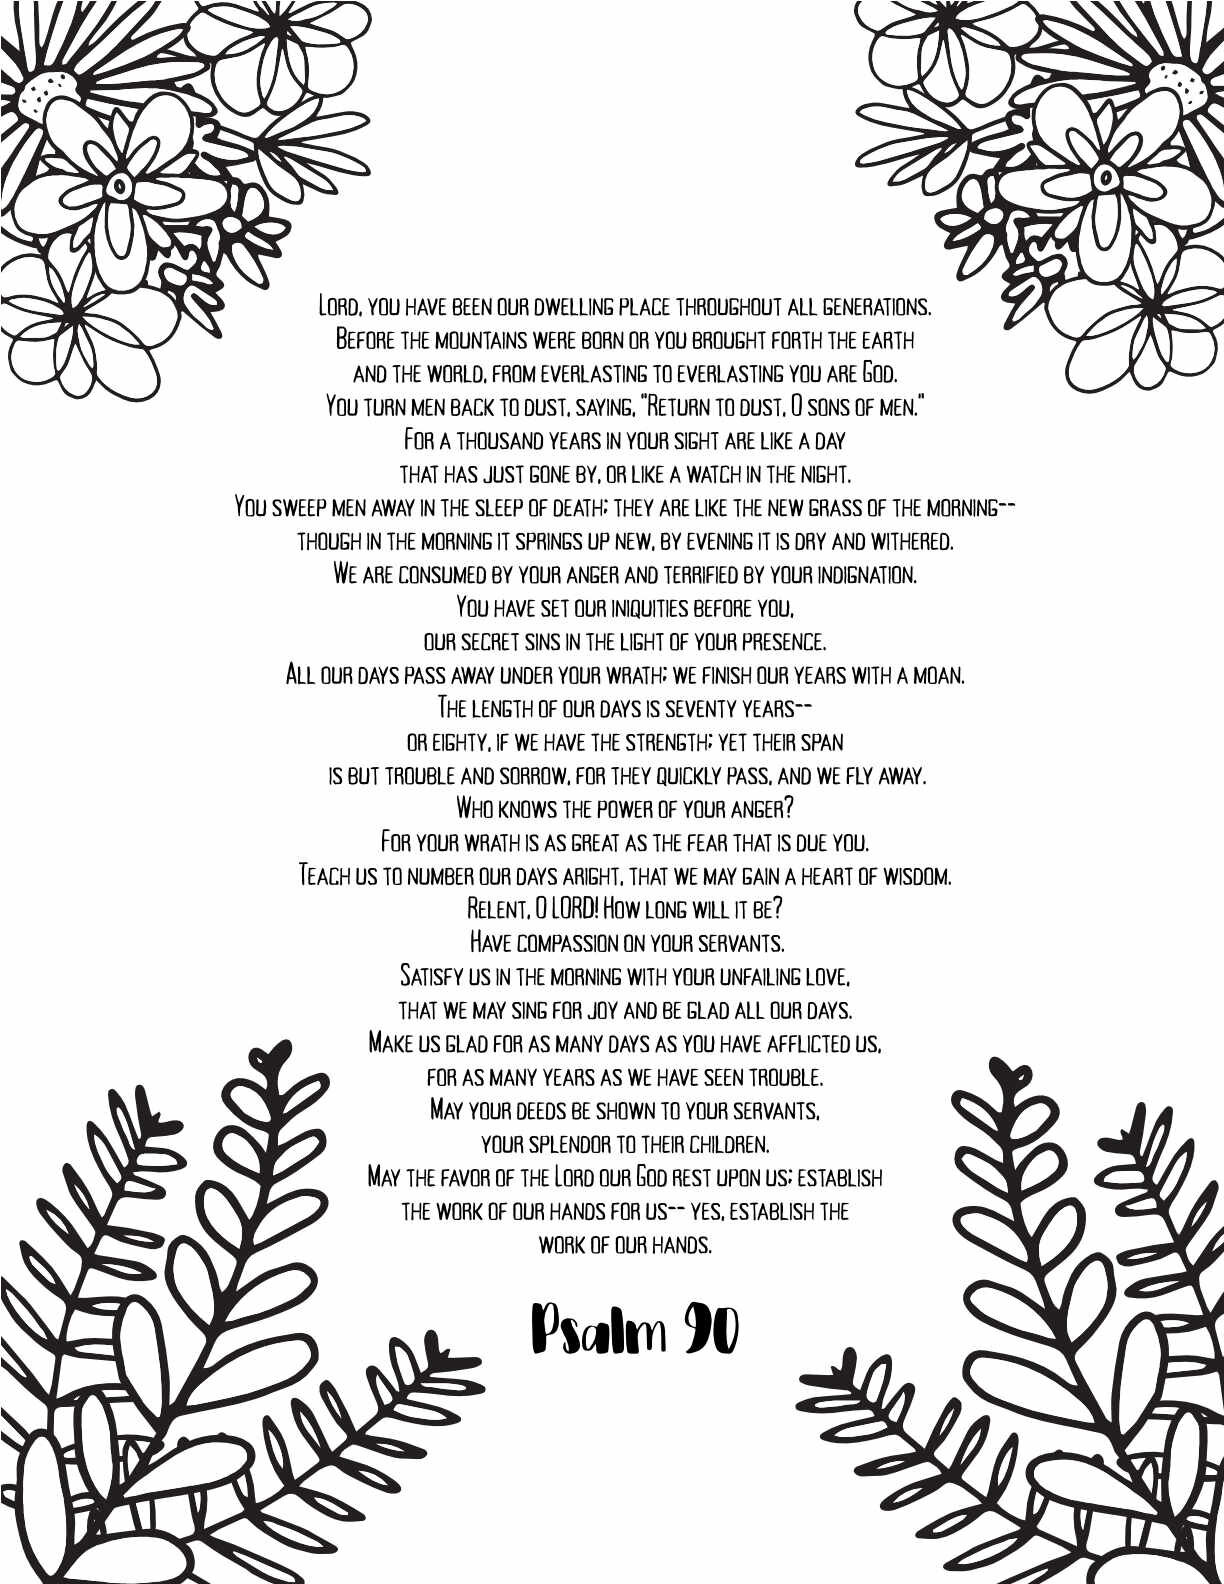 10 Free Printable Psalm Coloring Pages - Download and Color Adult Scripture - Psalm 90CLICK HERE TO DOWNLOAD THIS PAGE FREE